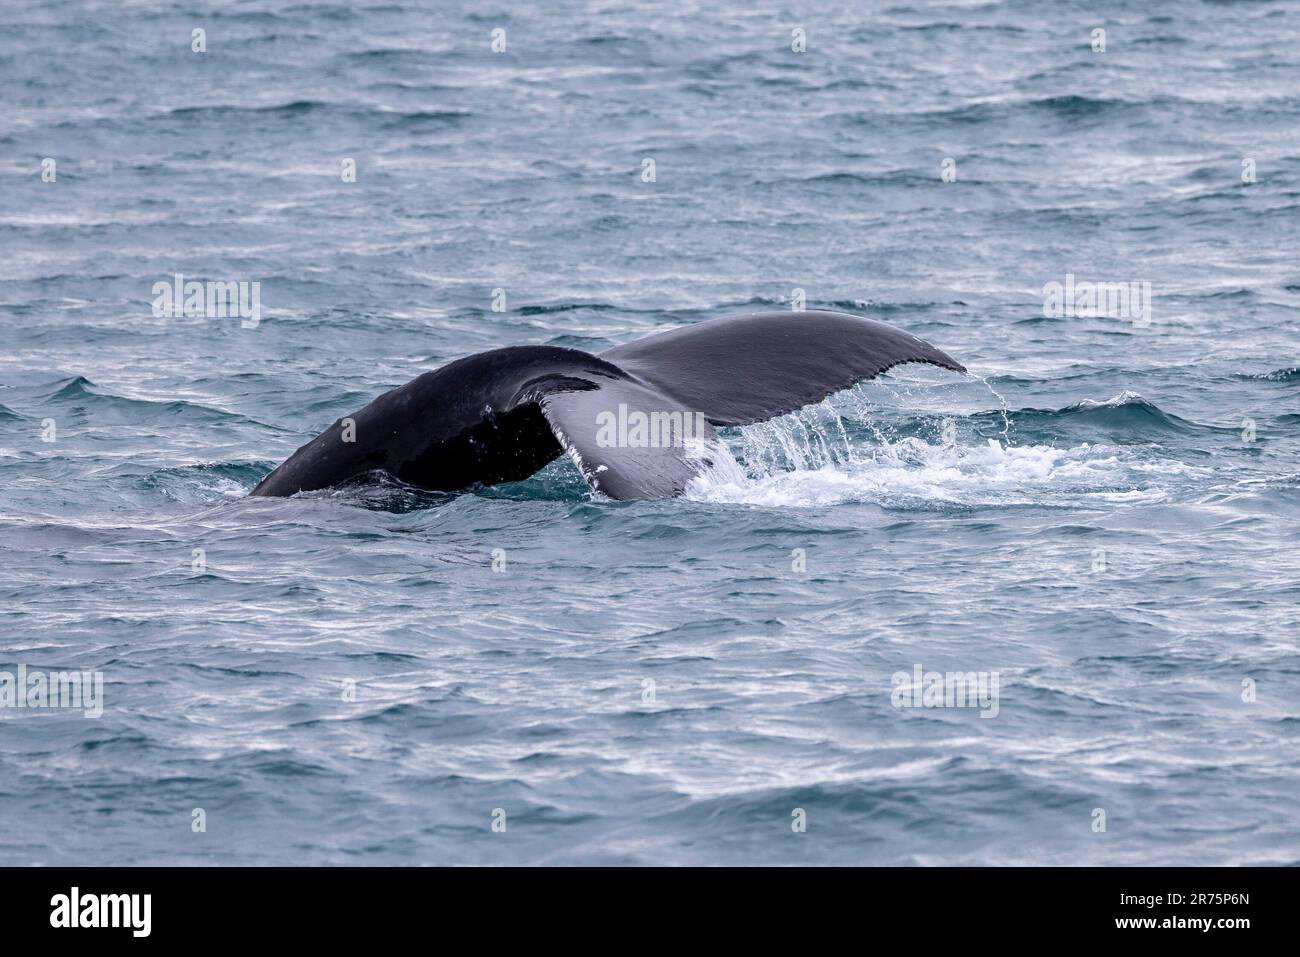 The tail fin of a humpback whale during a whale watching tour from Olafsvik in Iceland Stock Photo